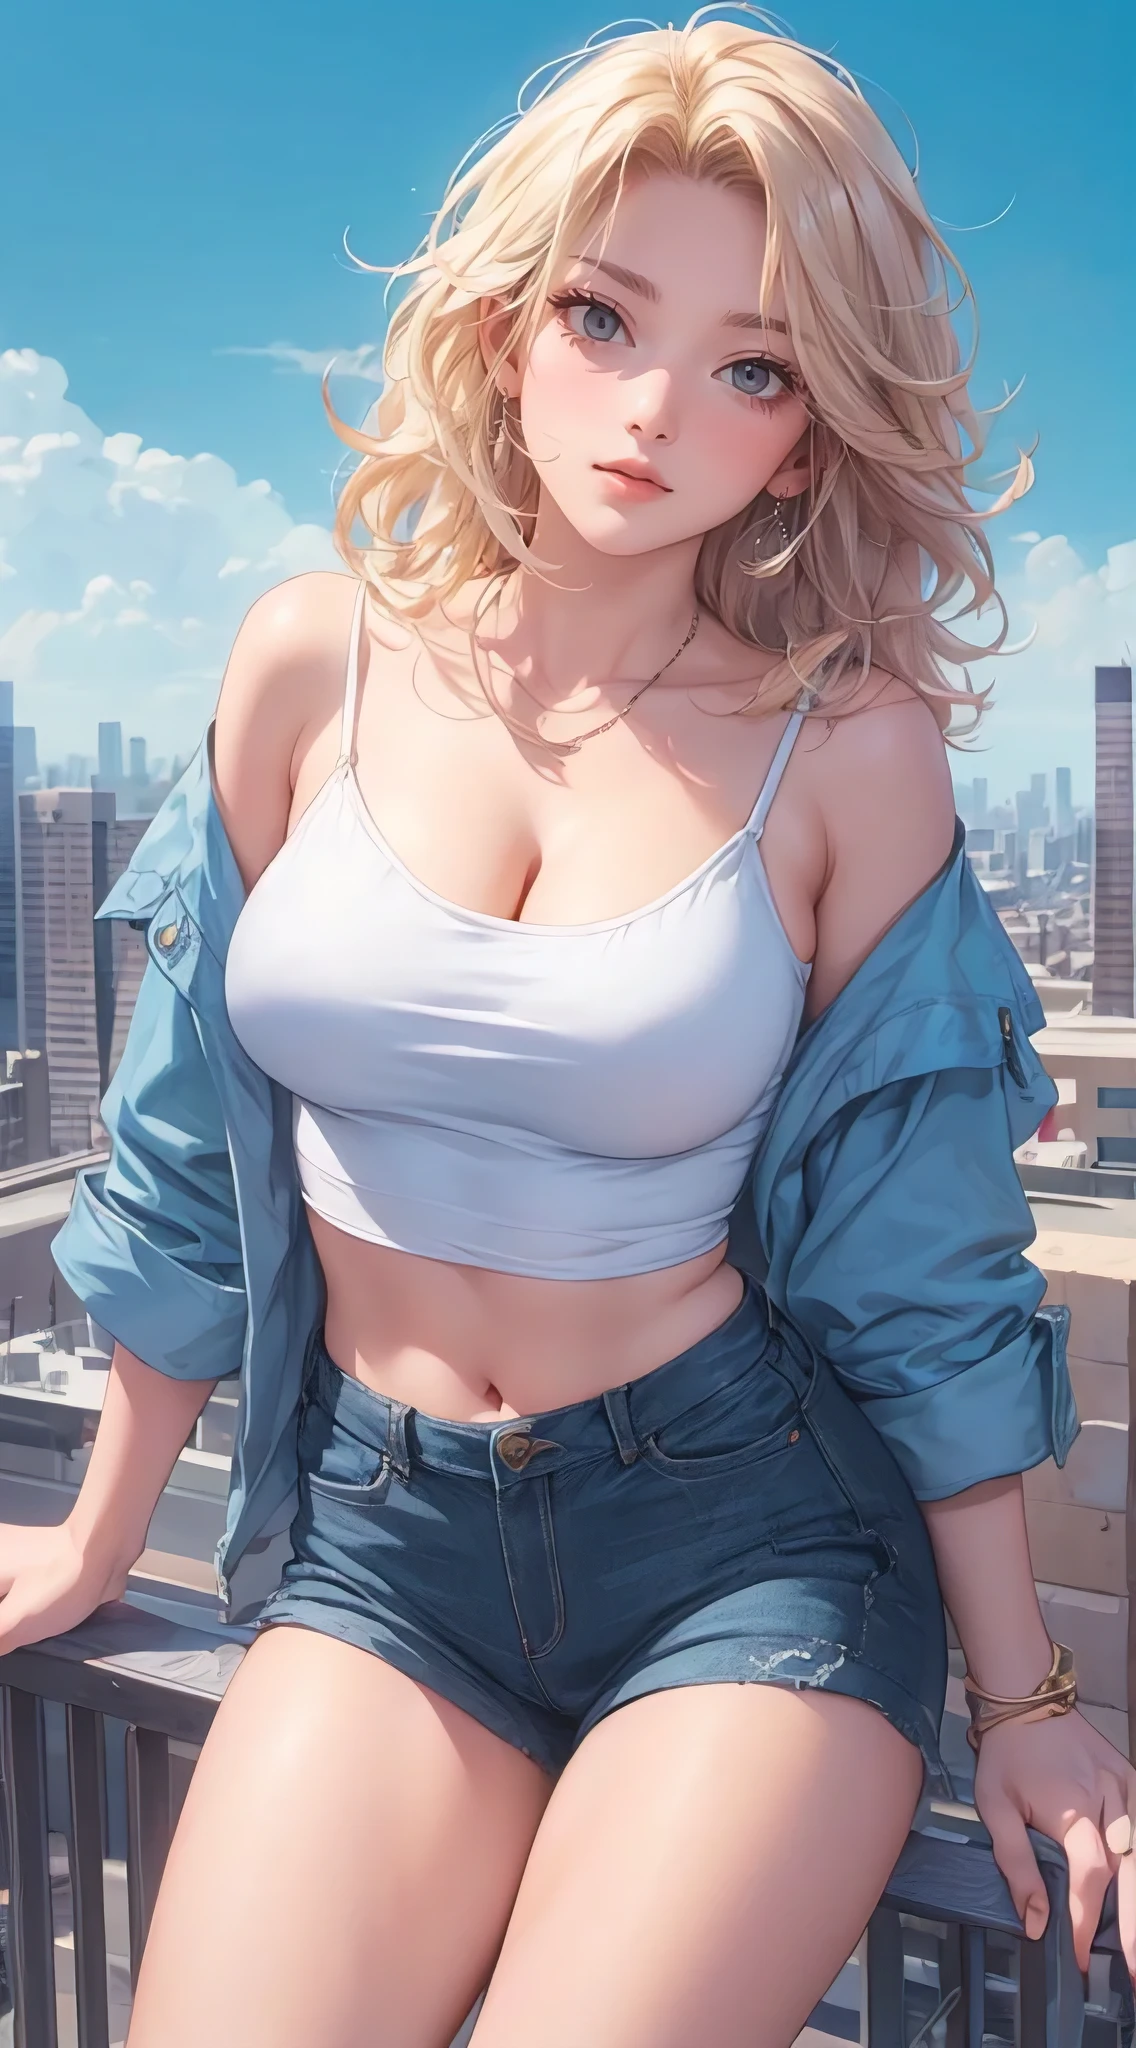 best quality, masterpiece, ultra-detailed, photorealistic, wavy hair, nice breasts, slim waist, wide hips, thick thighs, big gorgeous eyes, luscious lips, casual clothes, big city, anime realism by ayami kojima and donato giancola